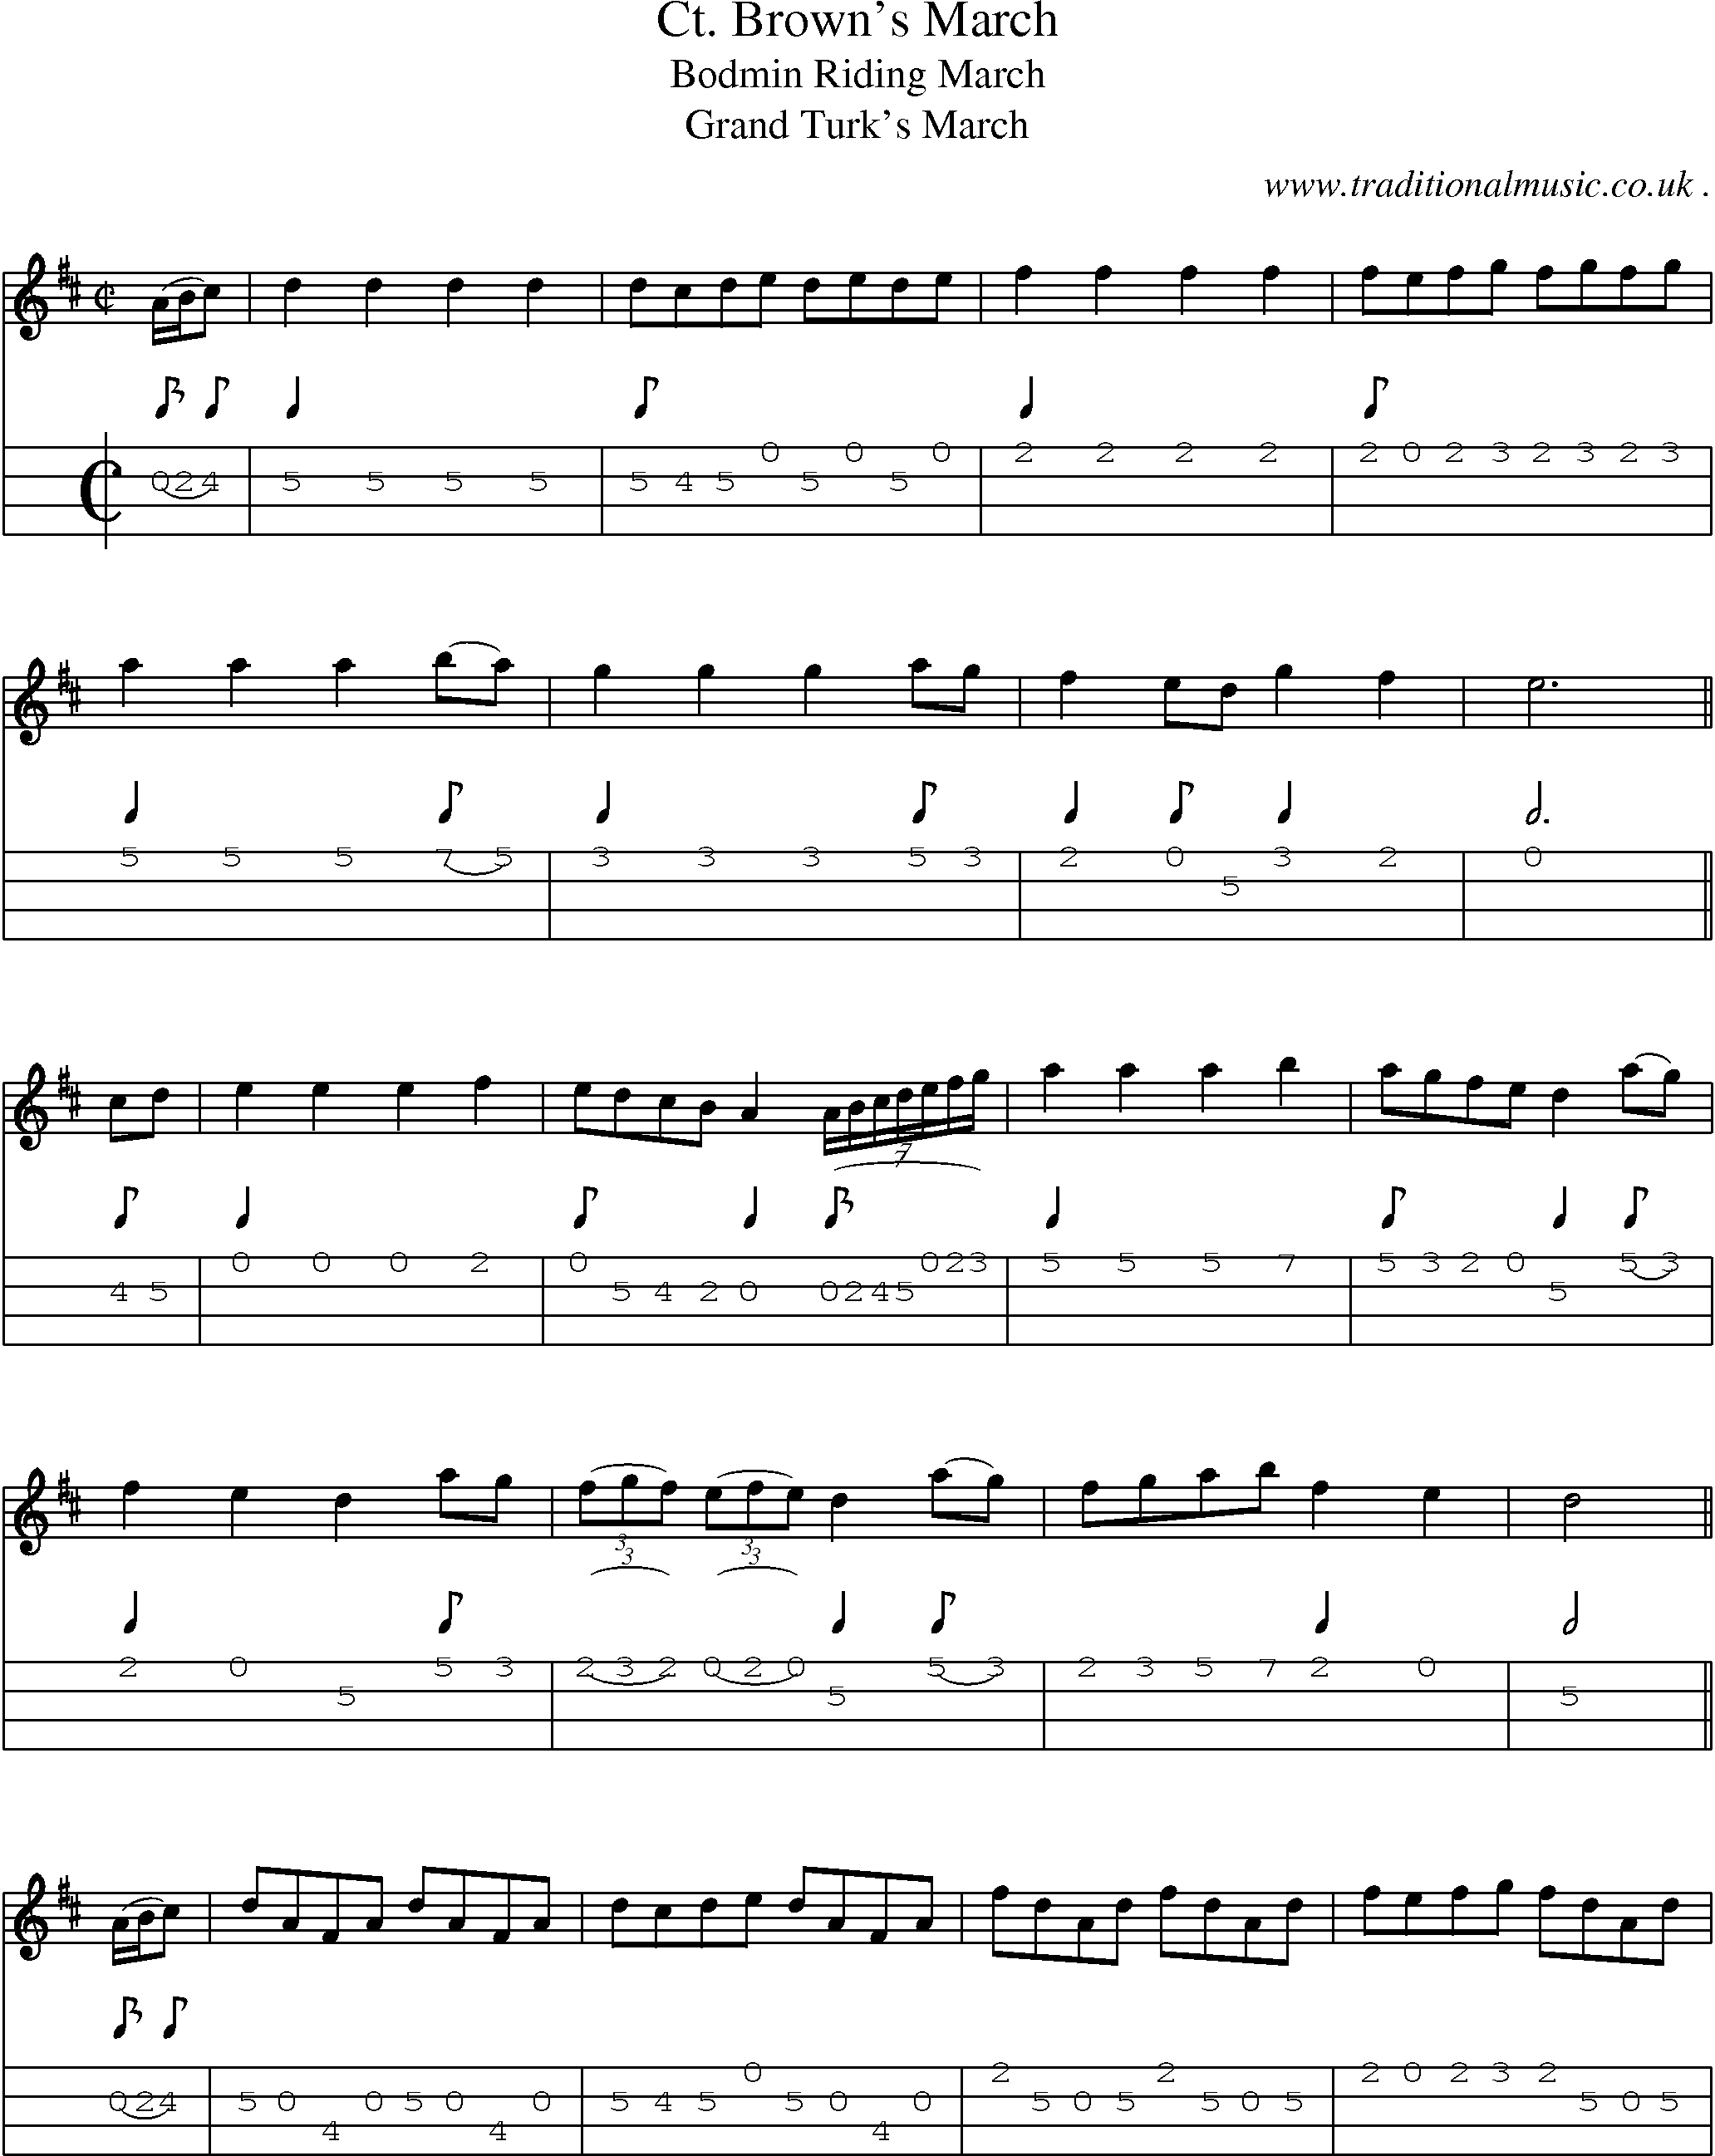 Sheet-Music and Mandolin Tabs for Ct Browns March